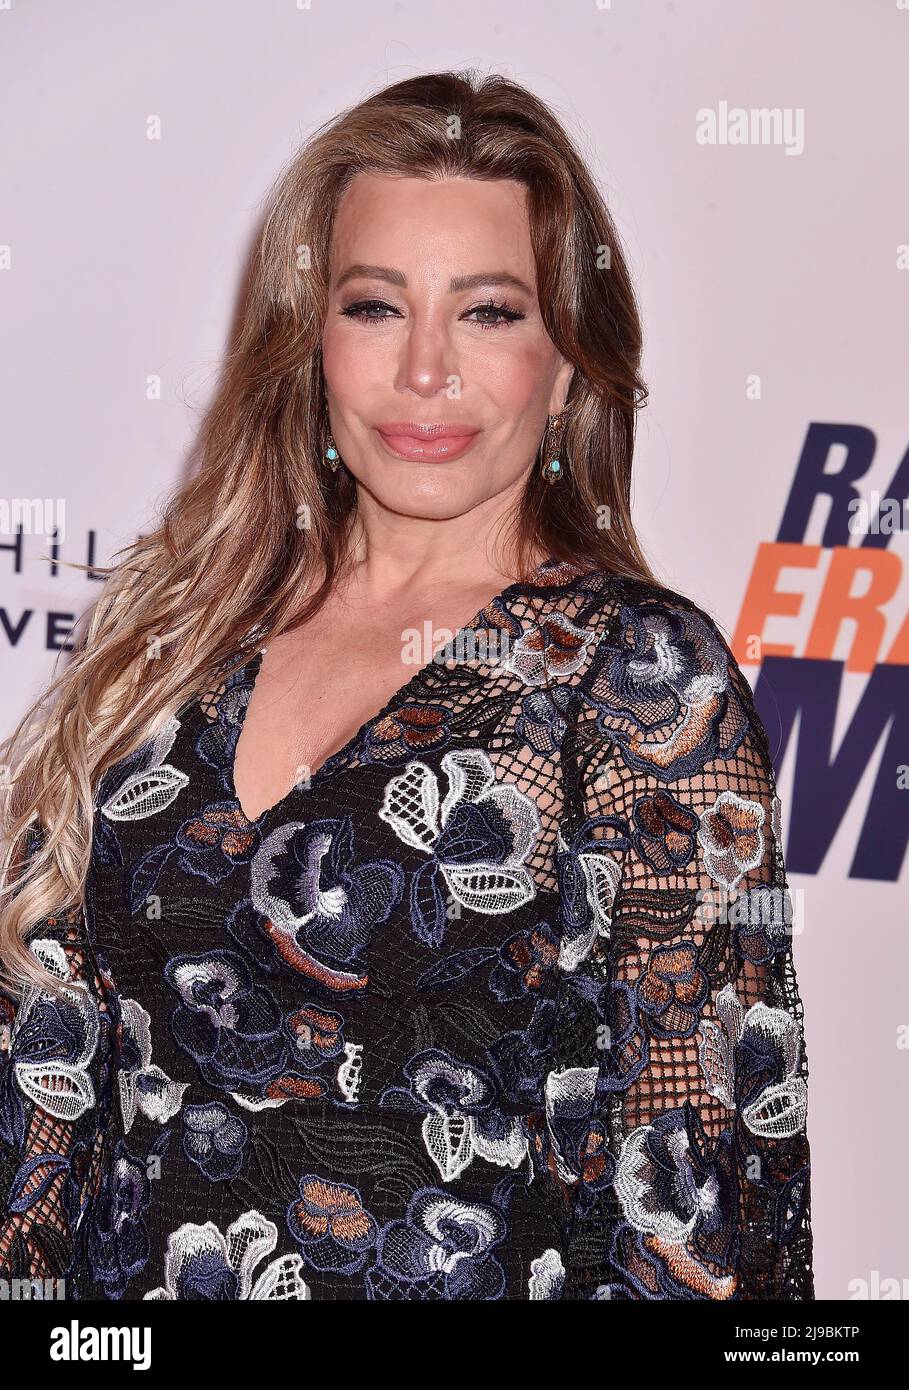 LOS ANGELES, CA - MAY 20: Taylor Dayne attends the 29th Annual Race To Erase MS Gala at the Fairmont Century Plaza Hotel on May 20, 2022 in Los Angeles, California. Credit: Jeffrey Mayer/JTM Photos/MediaPunch Stock Photo